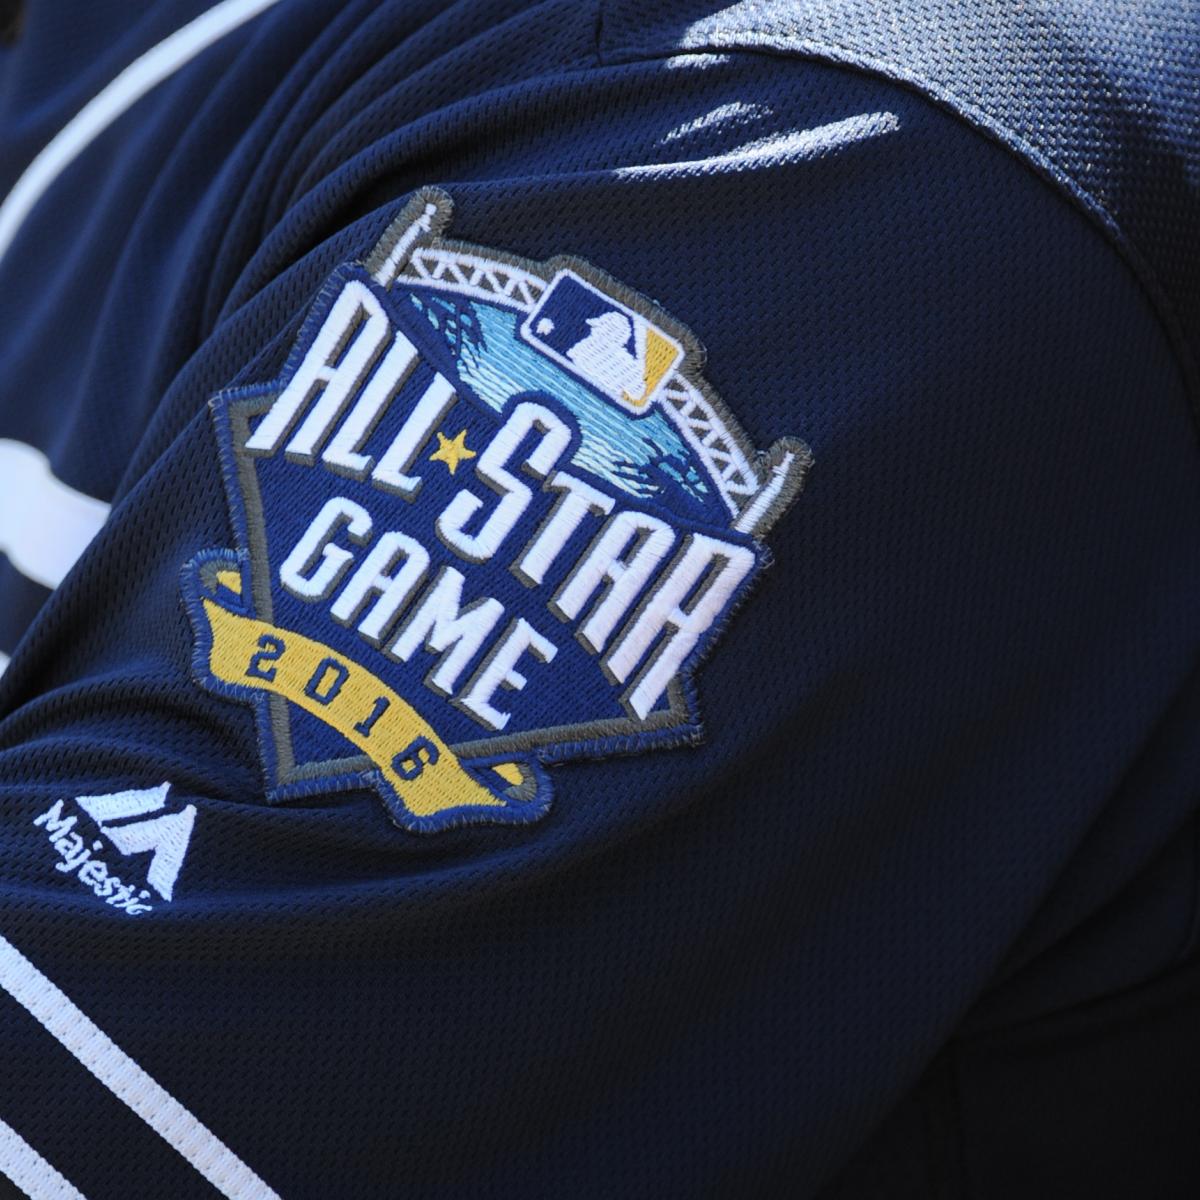 MLB unveiled the 2018 All-Star Game uniforms, and they're spectacular